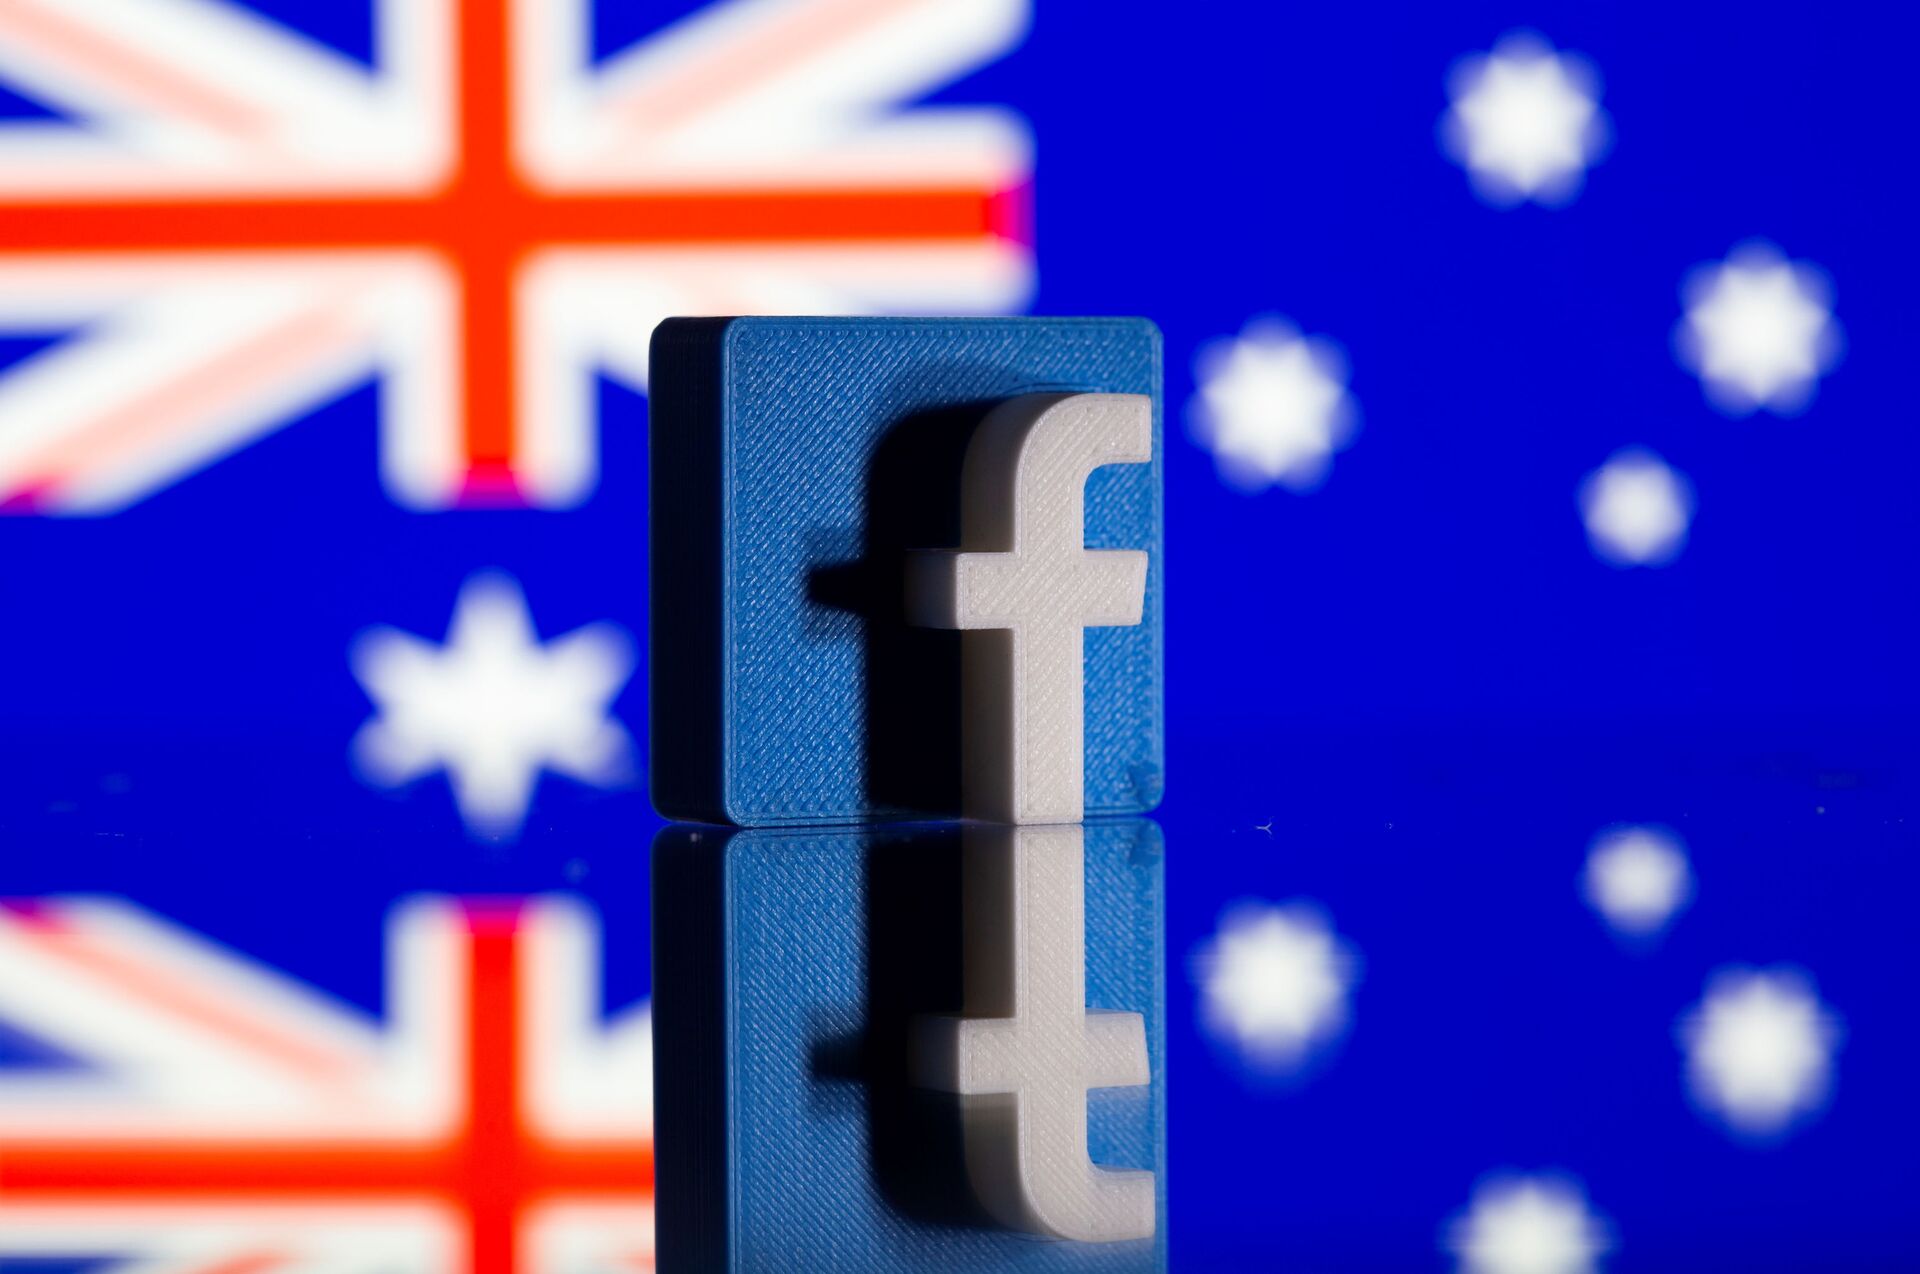 Facebook Wins a Battle with Aussies But May Lose the War in Long-Term, Observers Say - Sputnik International, 1920, 23.02.2021